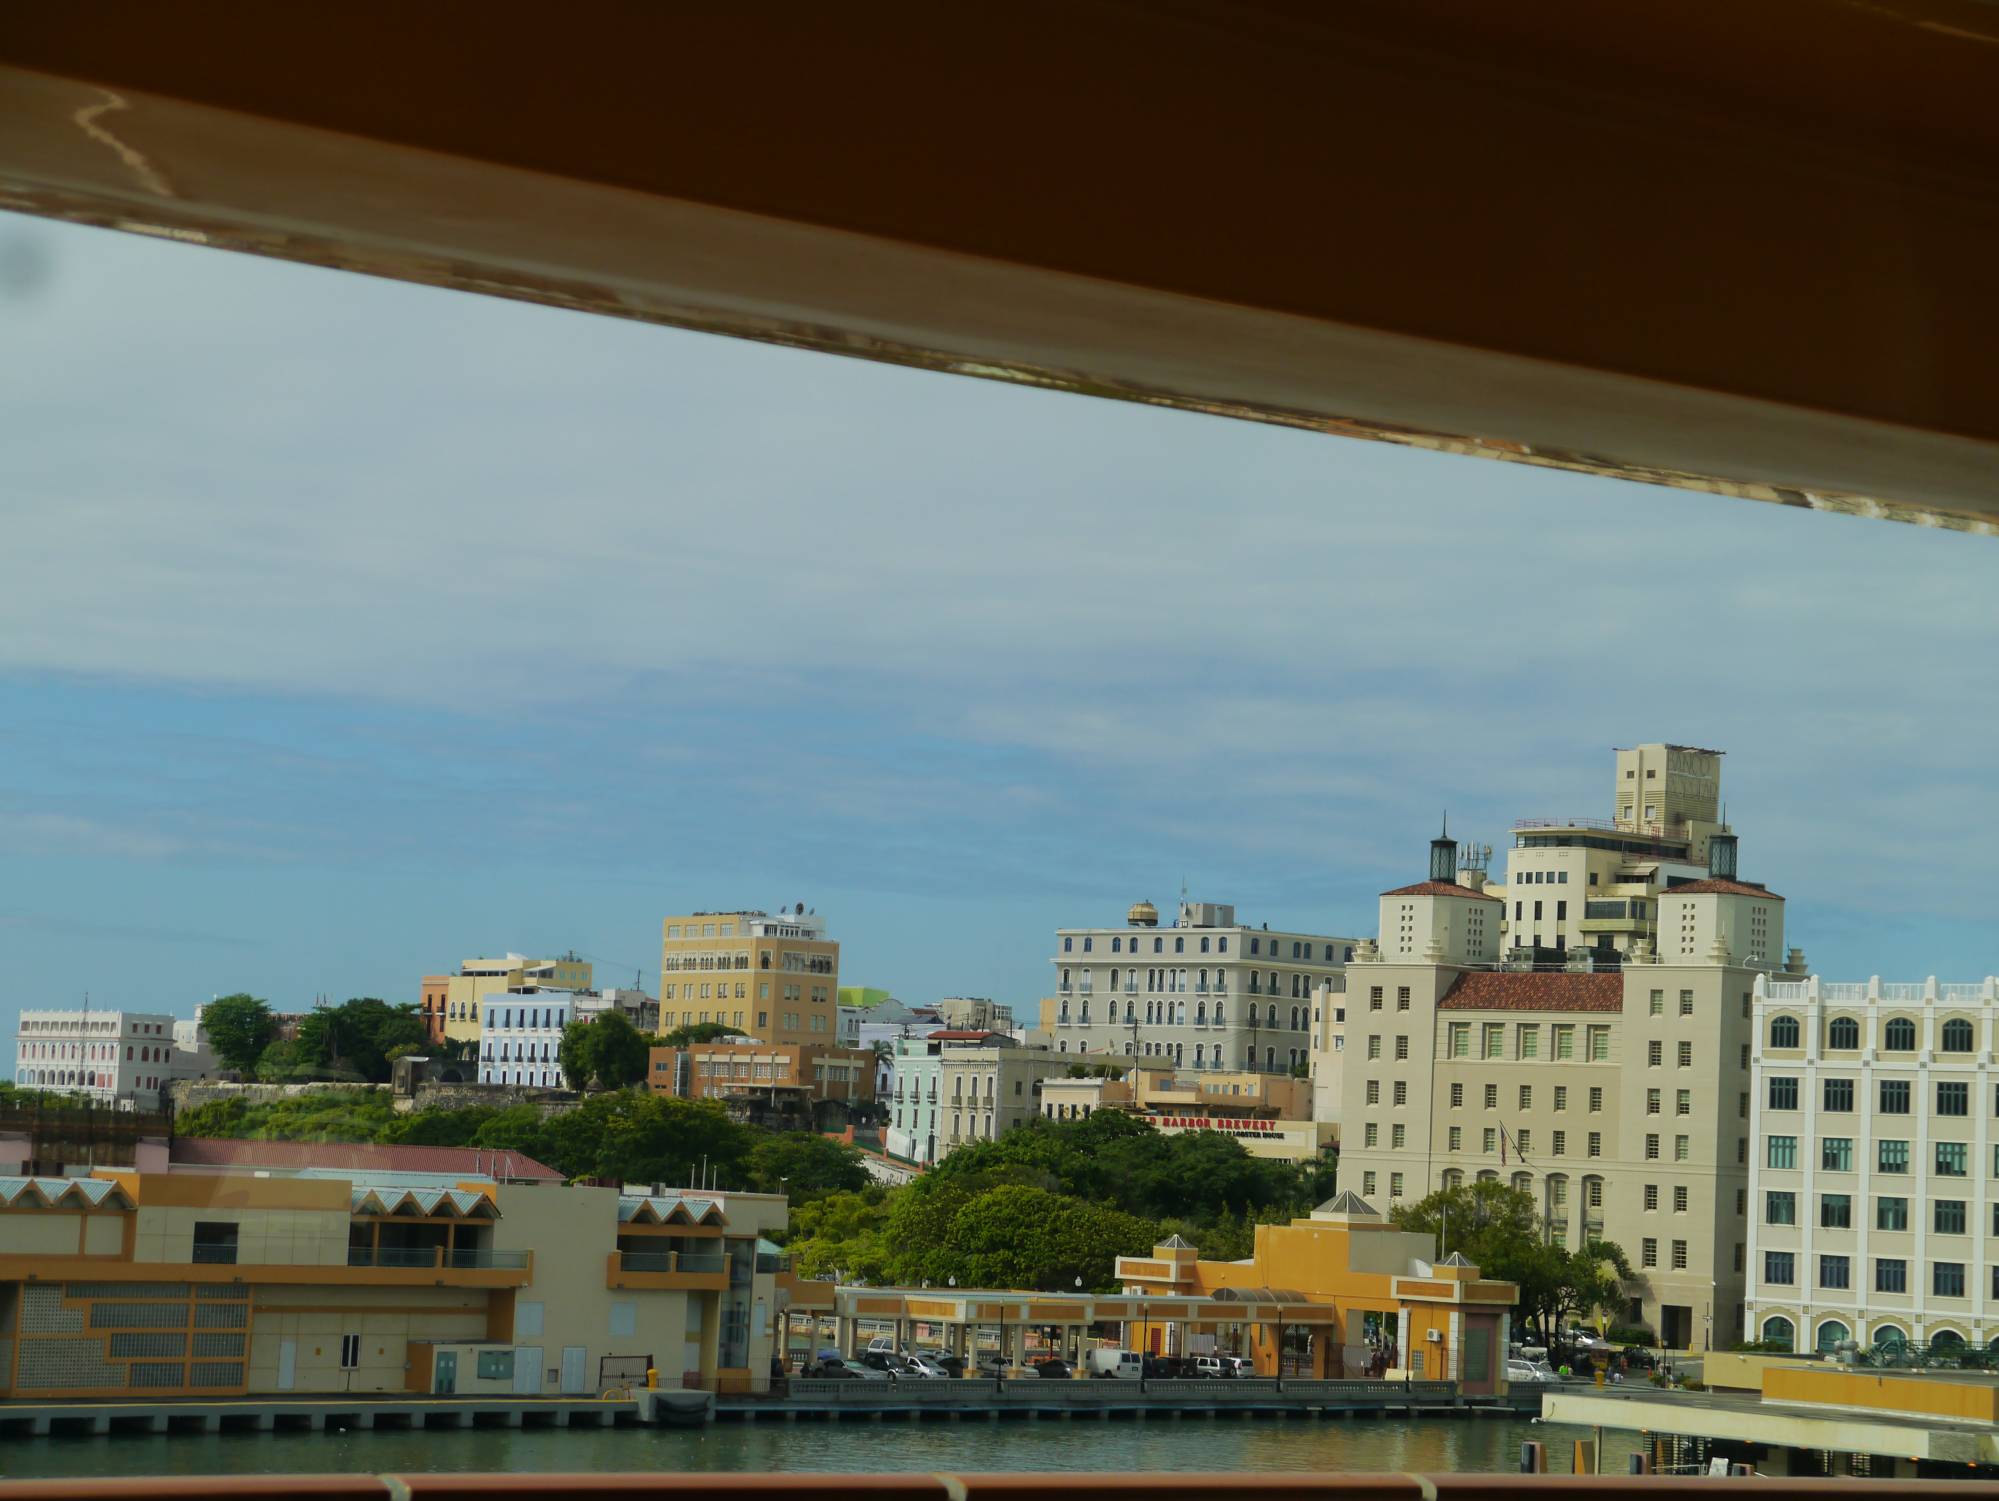 San Juan - view of the city from the ship